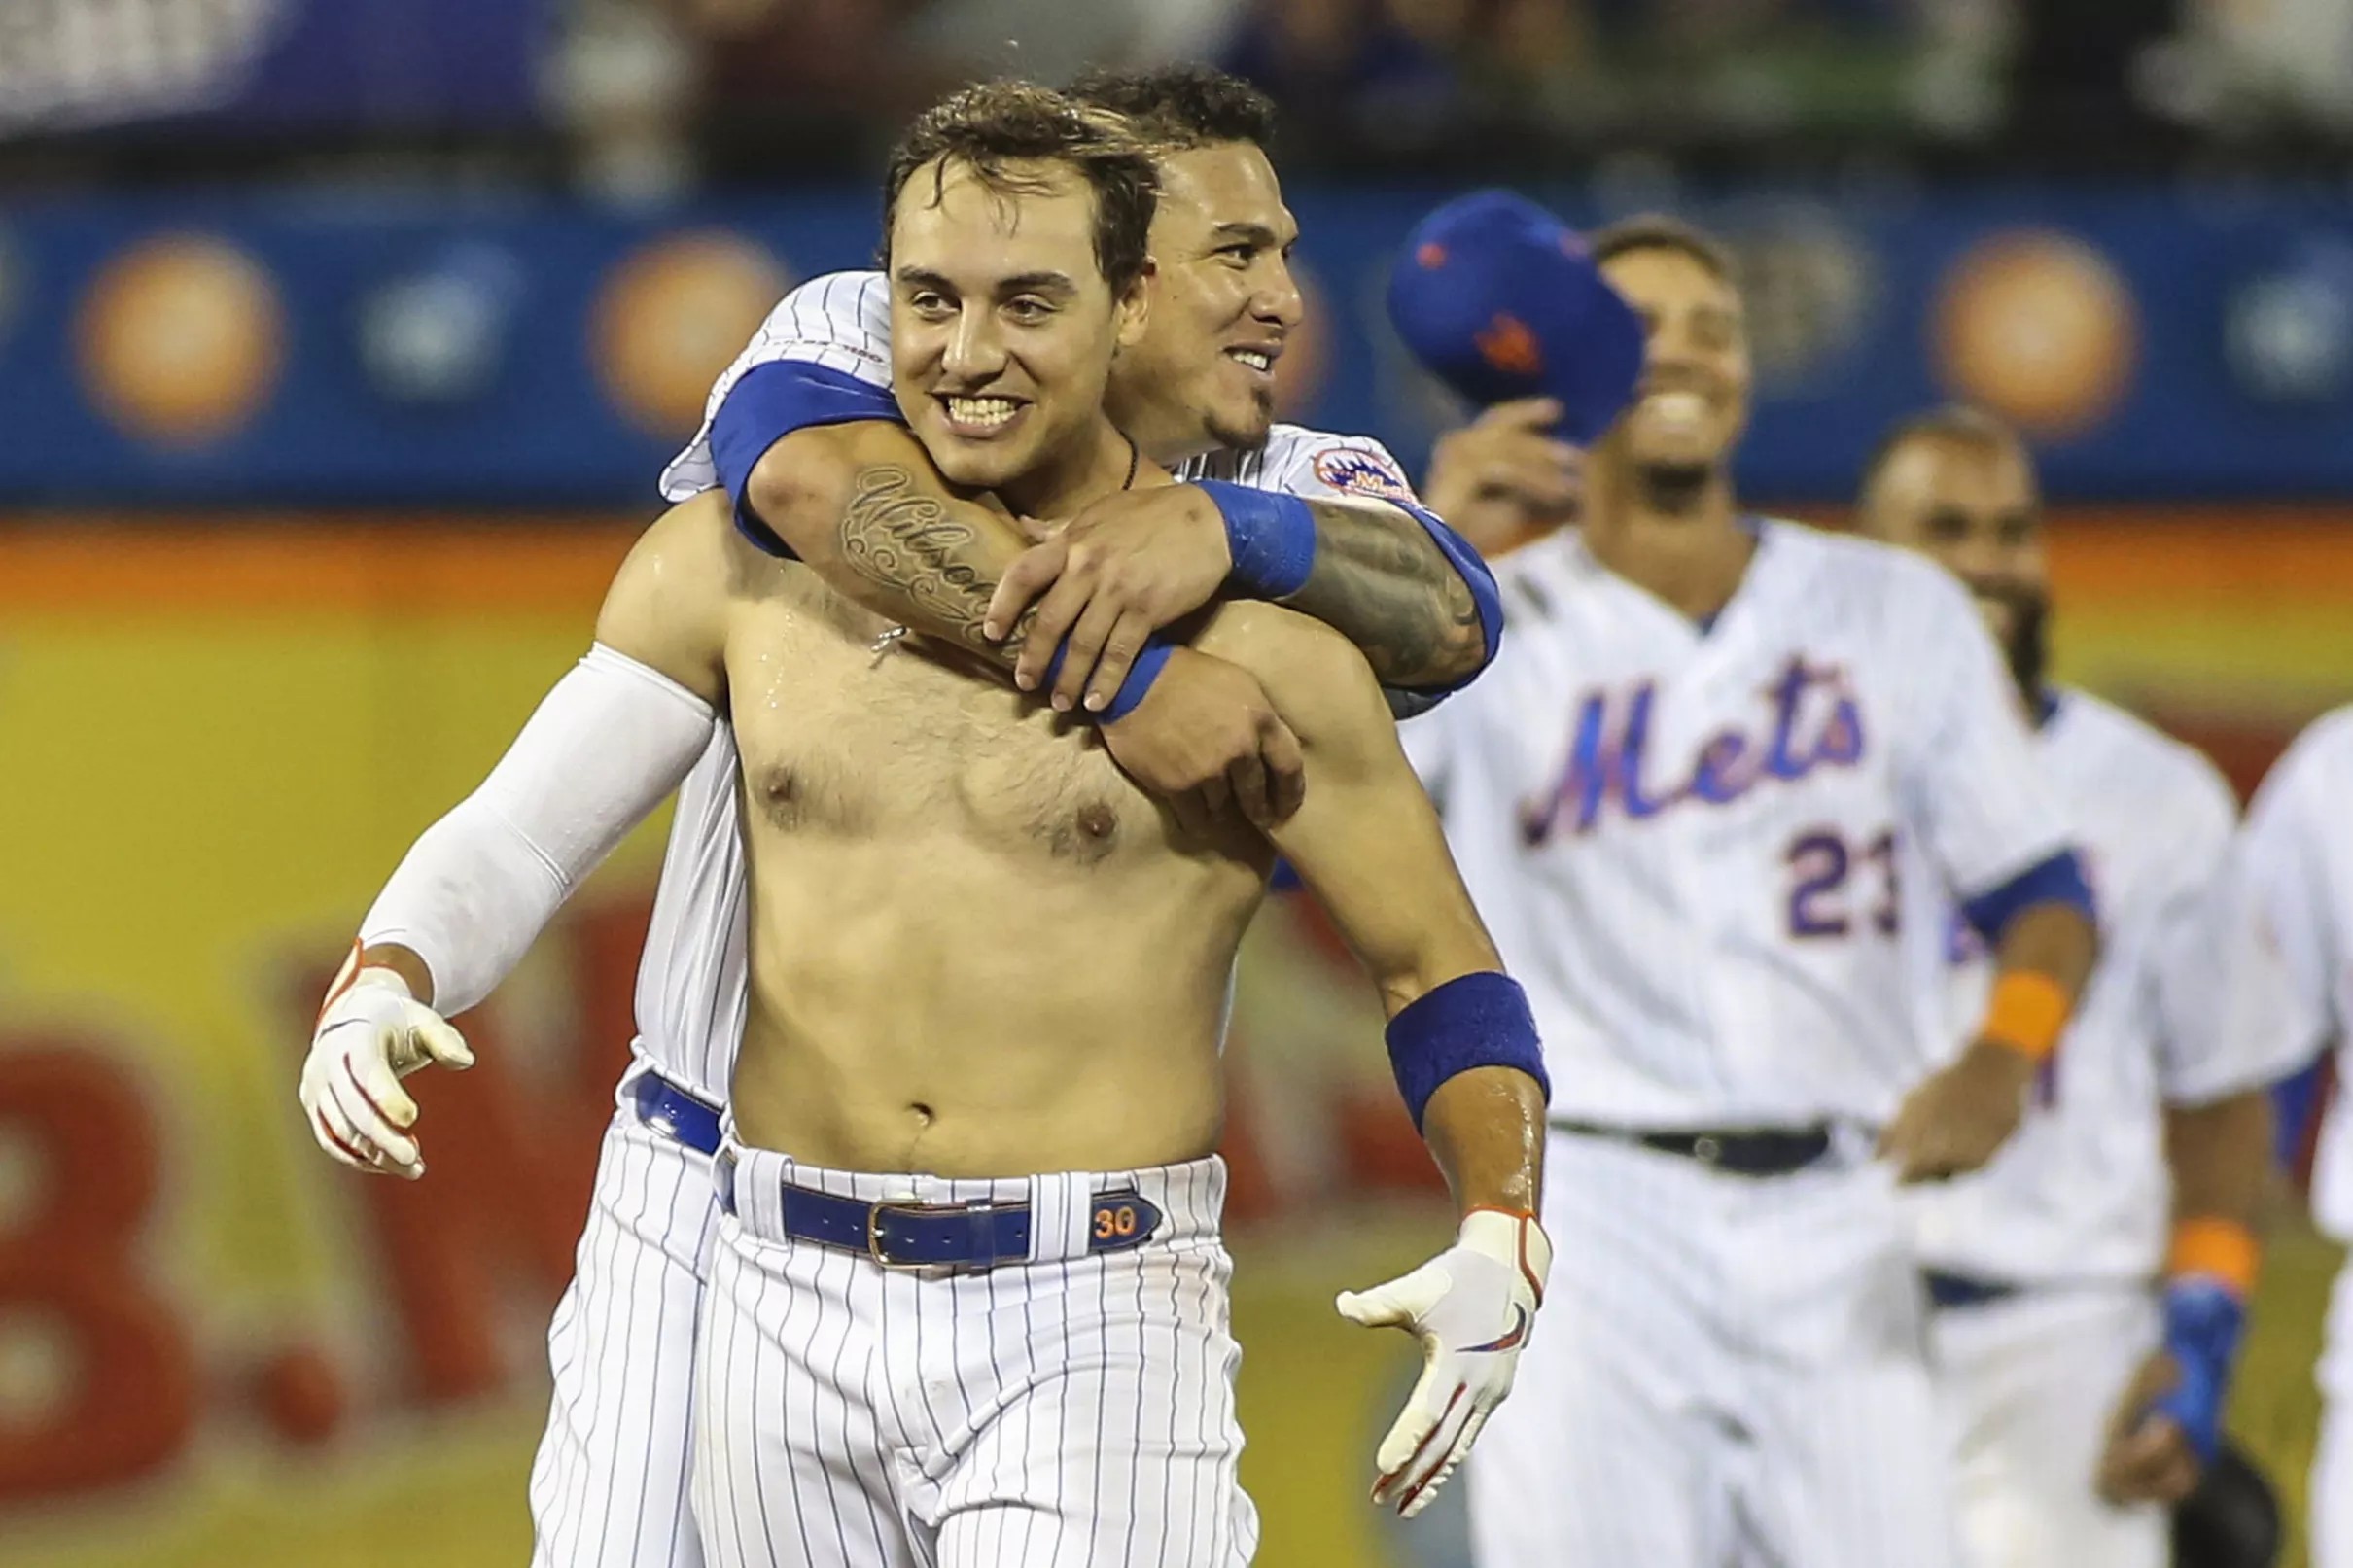 Michael Conforto was an anchor for the Mets this season